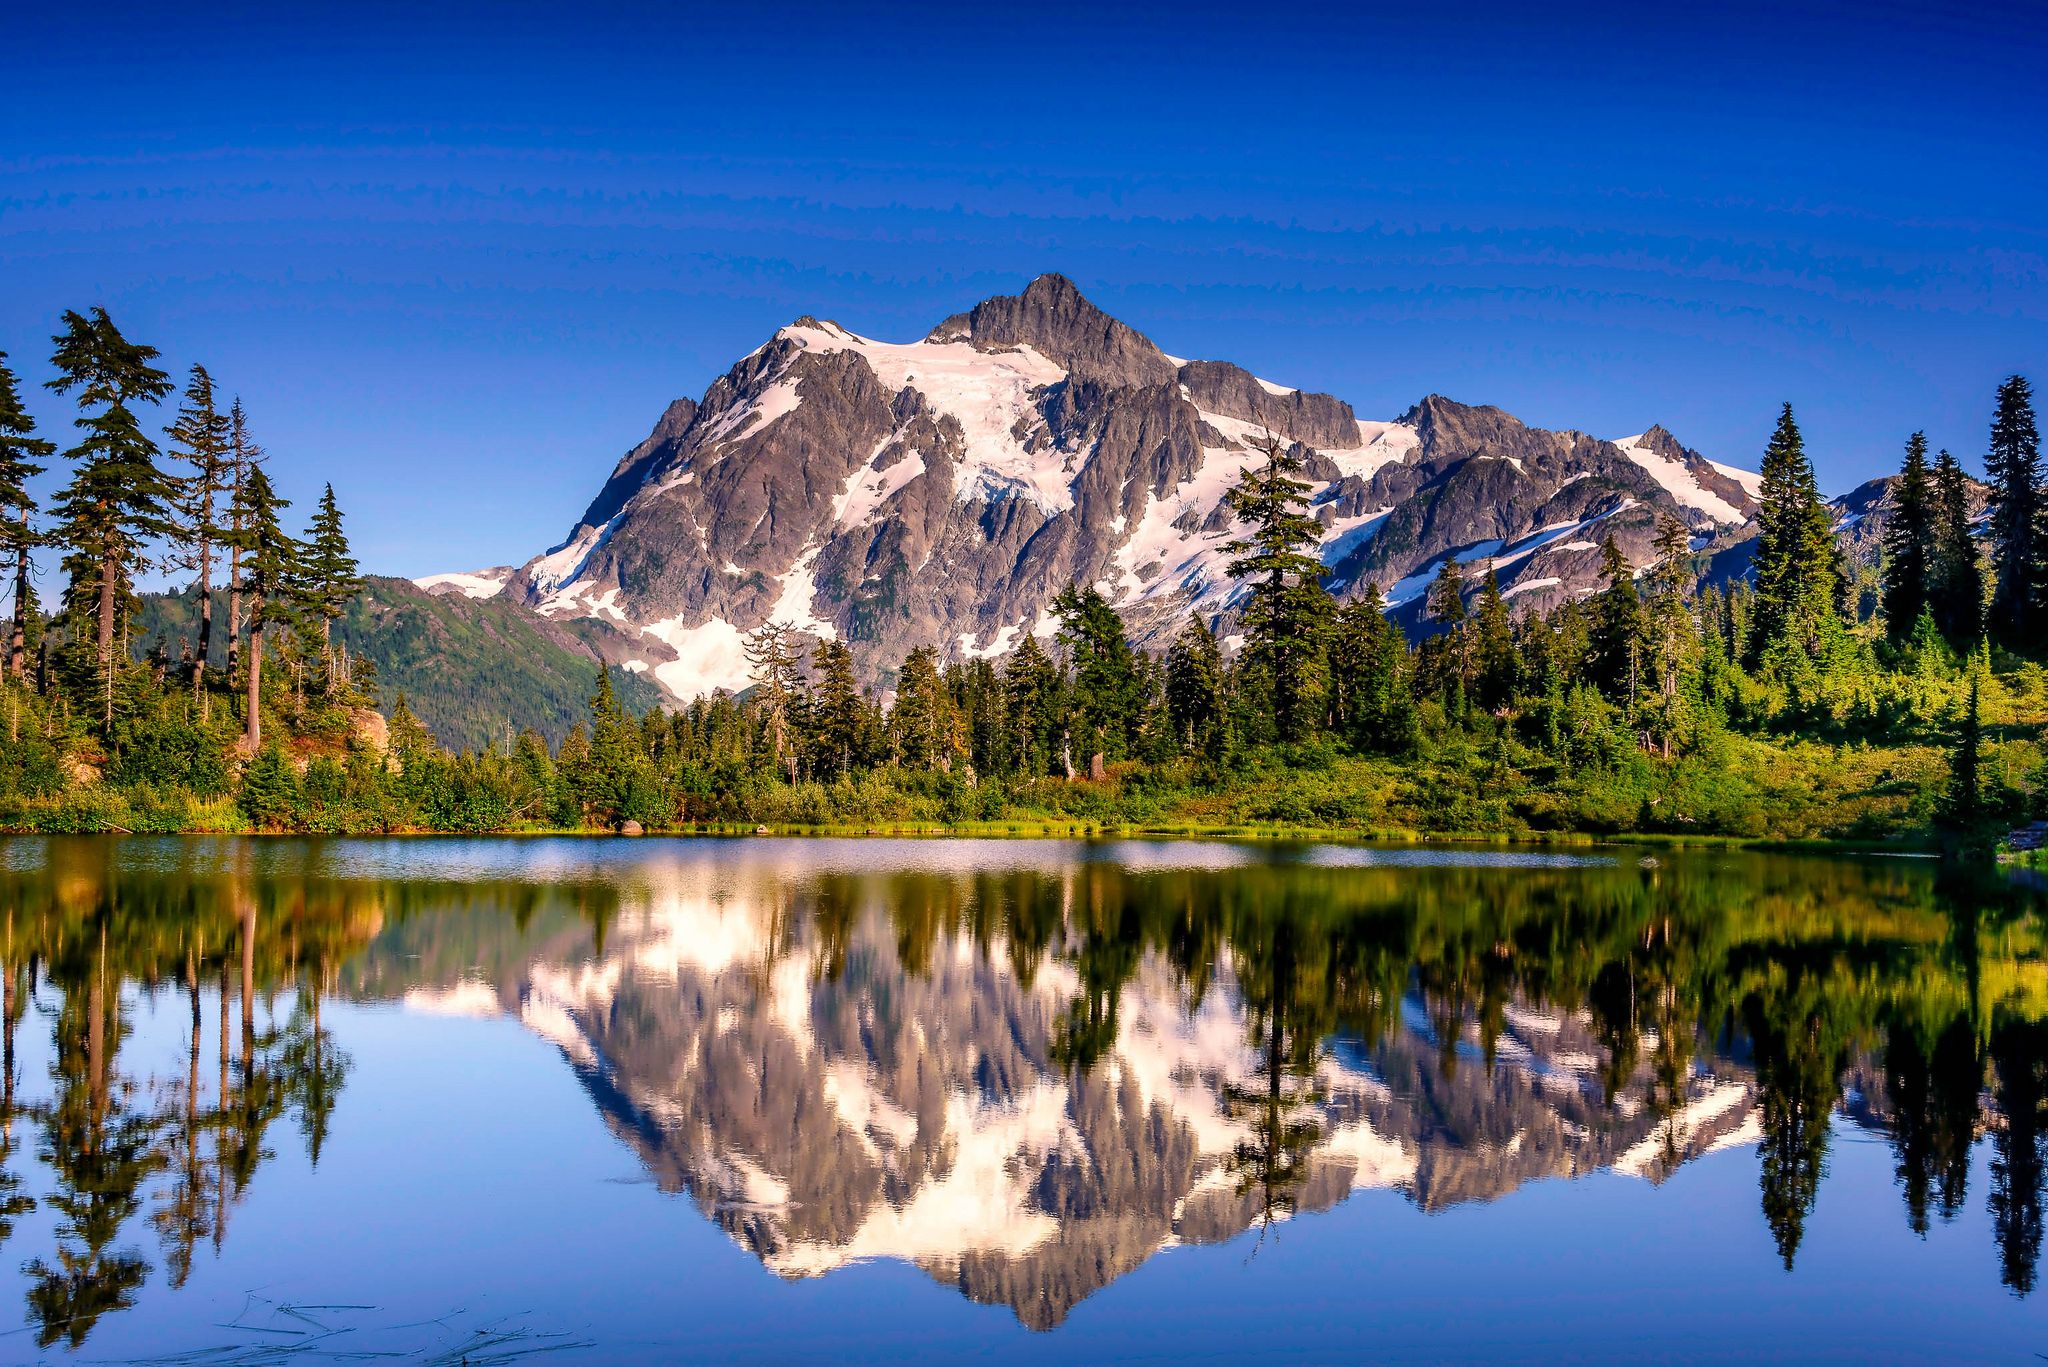 Mount Shuksan in North Cascades National Park